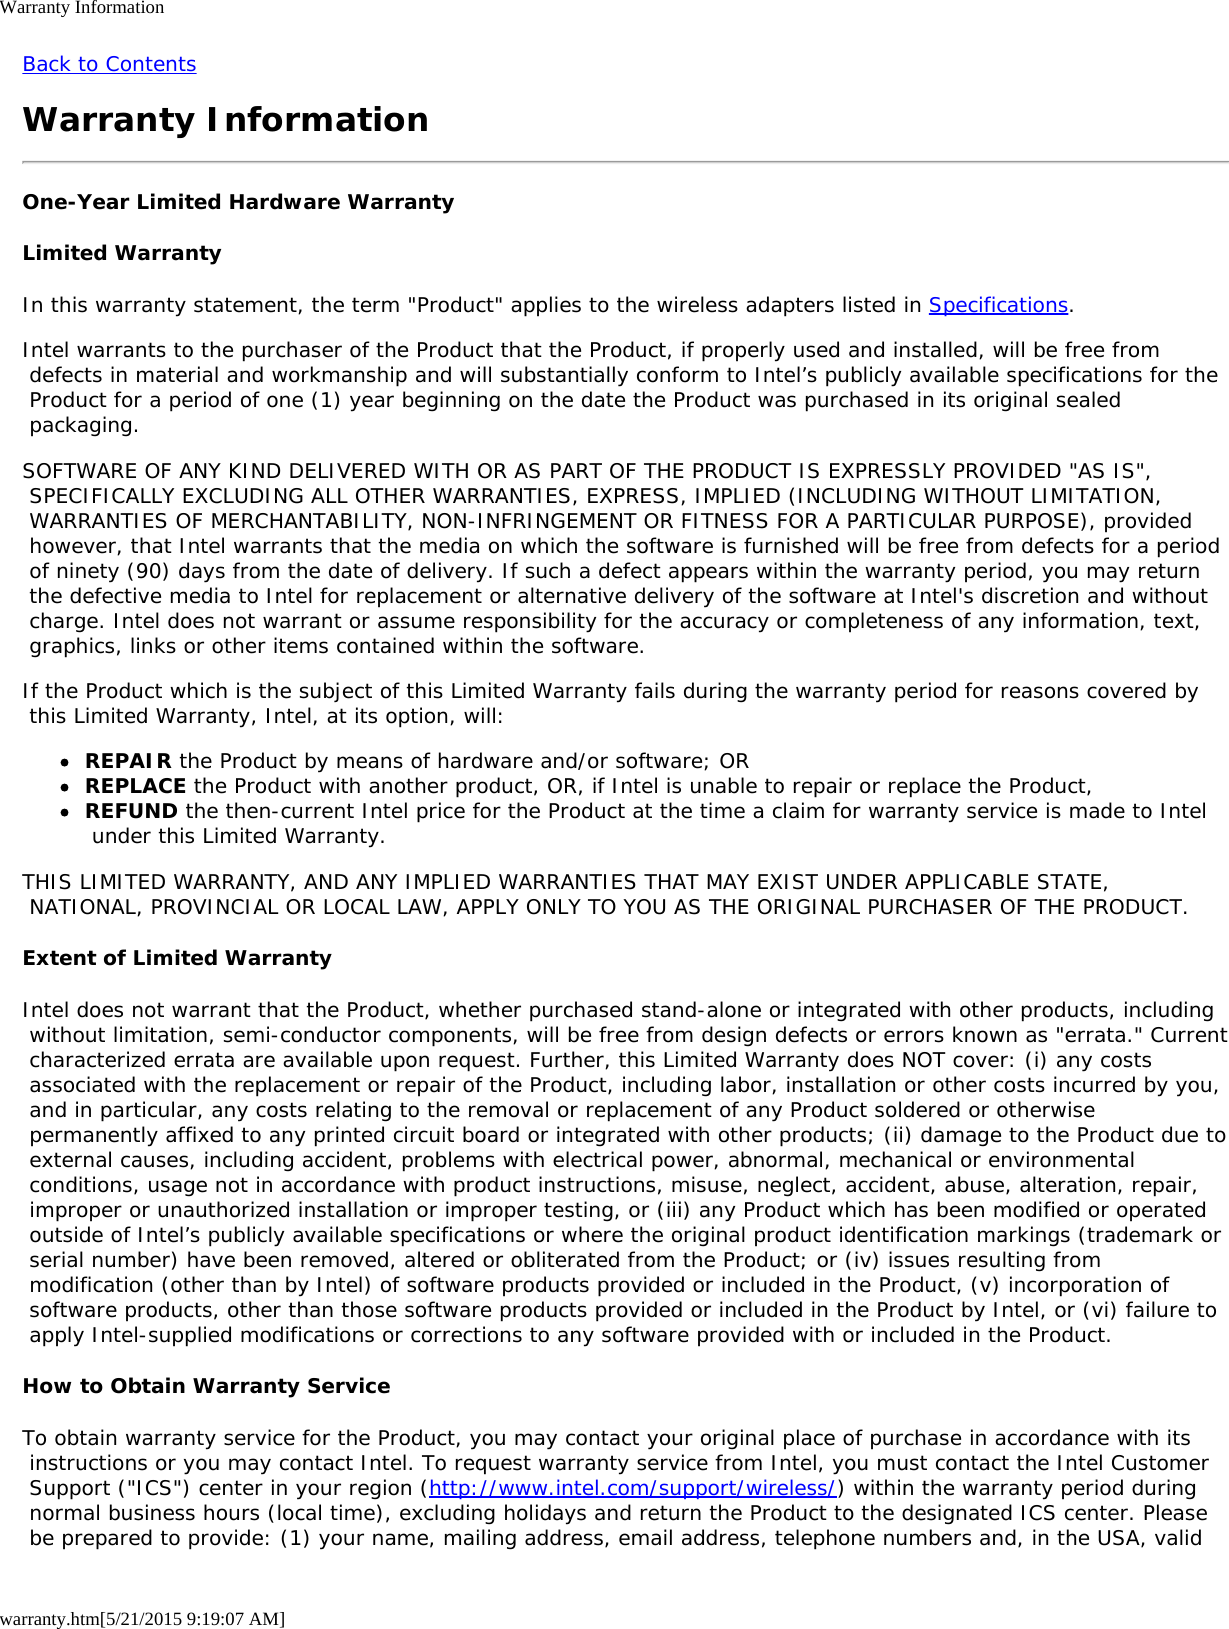 Warranty Informationwarranty.htm[5/21/2015 9:19:07 AM]Back to ContentsWarranty InformationOne-Year Limited Hardware WarrantyLimited WarrantyIn this warranty statement, the term &quot;Product&quot; applies to the wireless adapters listed in Specifications.Intel warrants to the purchaser of the Product that the Product, if properly used and installed, will be free from defects in material and workmanship and will substantially conform to Intel’s publicly available specifications for the Product for a period of one (1) year beginning on the date the Product was purchased in its original sealed packaging.SOFTWARE OF ANY KIND DELIVERED WITH OR AS PART OF THE PRODUCT IS EXPRESSLY PROVIDED &quot;AS IS&quot;, SPECIFICALLY EXCLUDING ALL OTHER WARRANTIES, EXPRESS, IMPLIED (INCLUDING WITHOUT LIMITATION, WARRANTIES OF MERCHANTABILITY, NON-INFRINGEMENT OR FITNESS FOR A PARTICULAR PURPOSE), provided however, that Intel warrants that the media on which the software is furnished will be free from defects for a period of ninety (90) days from the date of delivery. If such a defect appears within the warranty period, you may return the defective media to Intel for replacement or alternative delivery of the software at Intel&apos;s discretion and without charge. Intel does not warrant or assume responsibility for the accuracy or completeness of any information, text, graphics, links or other items contained within the software.If the Product which is the subject of this Limited Warranty fails during the warranty period for reasons covered by this Limited Warranty, Intel, at its option, will:REPAIR the Product by means of hardware and/or software; ORREPLACE the Product with another product, OR, if Intel is unable to repair or replace the Product,REFUND the then-current Intel price for the Product at the time a claim for warranty service is made to Intel under this Limited Warranty.THIS LIMITED WARRANTY, AND ANY IMPLIED WARRANTIES THAT MAY EXIST UNDER APPLICABLE STATE, NATIONAL, PROVINCIAL OR LOCAL LAW, APPLY ONLY TO YOU AS THE ORIGINAL PURCHASER OF THE PRODUCT.Extent of Limited WarrantyIntel does not warrant that the Product, whether purchased stand-alone or integrated with other products, including without limitation, semi-conductor components, will be free from design defects or errors known as &quot;errata.&quot; Current characterized errata are available upon request. Further, this Limited Warranty does NOT cover: (i) any costs associated with the replacement or repair of the Product, including labor, installation or other costs incurred by you, and in particular, any costs relating to the removal or replacement of any Product soldered or otherwise permanently affixed to any printed circuit board or integrated with other products; (ii) damage to the Product due to external causes, including accident, problems with electrical power, abnormal, mechanical or environmental conditions, usage not in accordance with product instructions, misuse, neglect, accident, abuse, alteration, repair, improper or unauthorized installation or improper testing, or (iii) any Product which has been modified or operated outside of Intel’s publicly available specifications or where the original product identification markings (trademark or serial number) have been removed, altered or obliterated from the Product; or (iv) issues resulting from modification (other than by Intel) of software products provided or included in the Product, (v) incorporation of software products, other than those software products provided or included in the Product by Intel, or (vi) failure to apply Intel-supplied modifications or corrections to any software provided with or included in the Product.How to Obtain Warranty ServiceTo obtain warranty service for the Product, you may contact your original place of purchase in accordance with its instructions or you may contact Intel. To request warranty service from Intel, you must contact the Intel Customer Support (&quot;ICS&quot;) center in your region (http://www.intel.com/support/wireless/) within the warranty period during normal business hours (local time), excluding holidays and return the Product to the designated ICS center. Please be prepared to provide: (1) your name, mailing address, email address, telephone numbers and, in the USA, valid